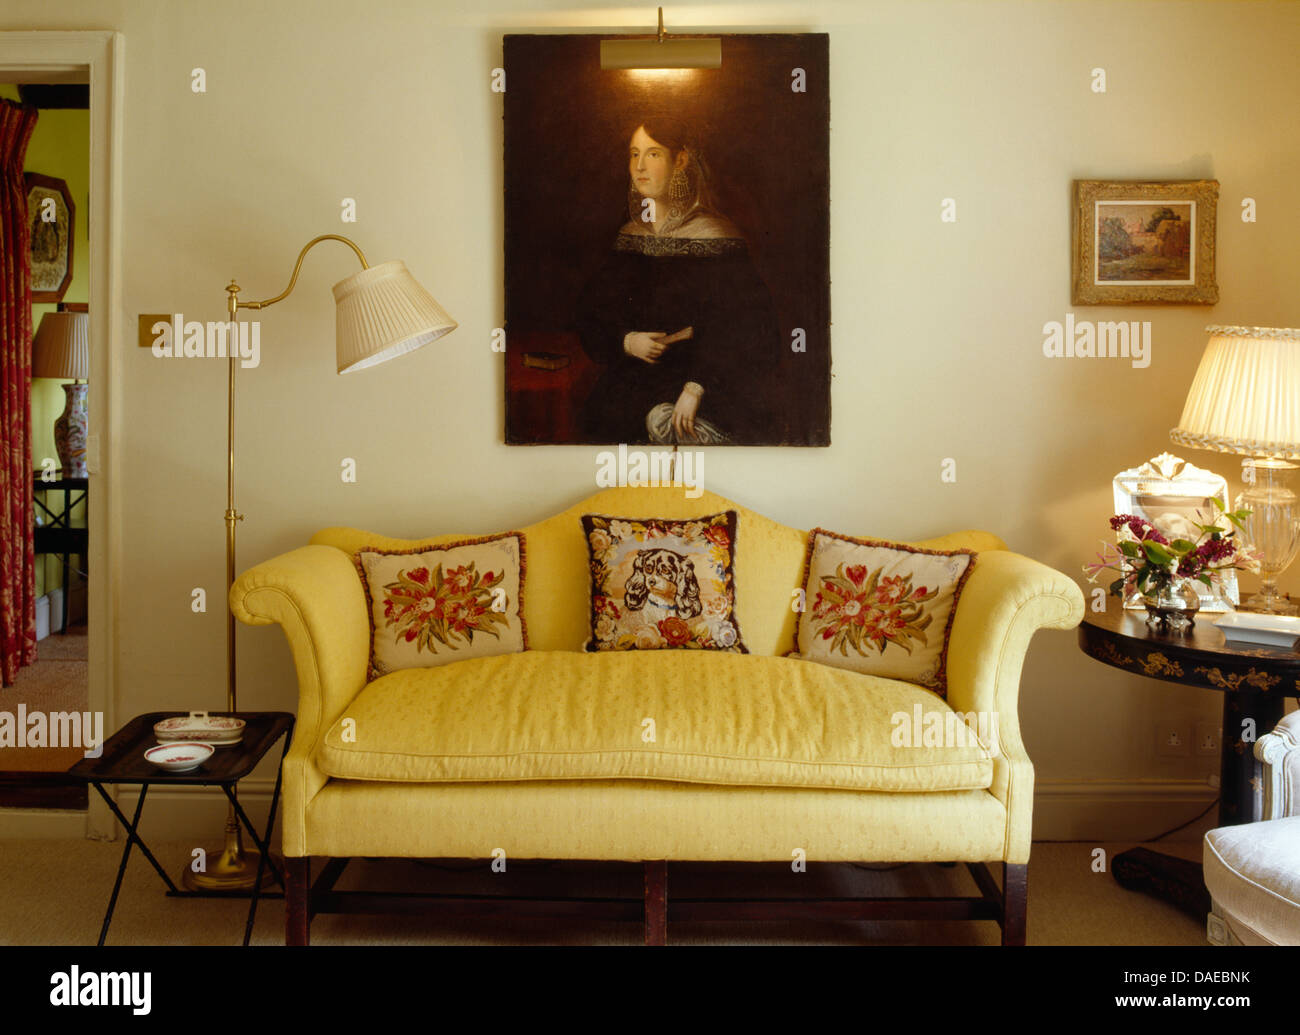 https://c8.alamy.com/comp/DAEBNK/large-oil-portrait-above-yellow-sofa-with-tapestry-cushions-in-cottage-DAEBNK.jpg